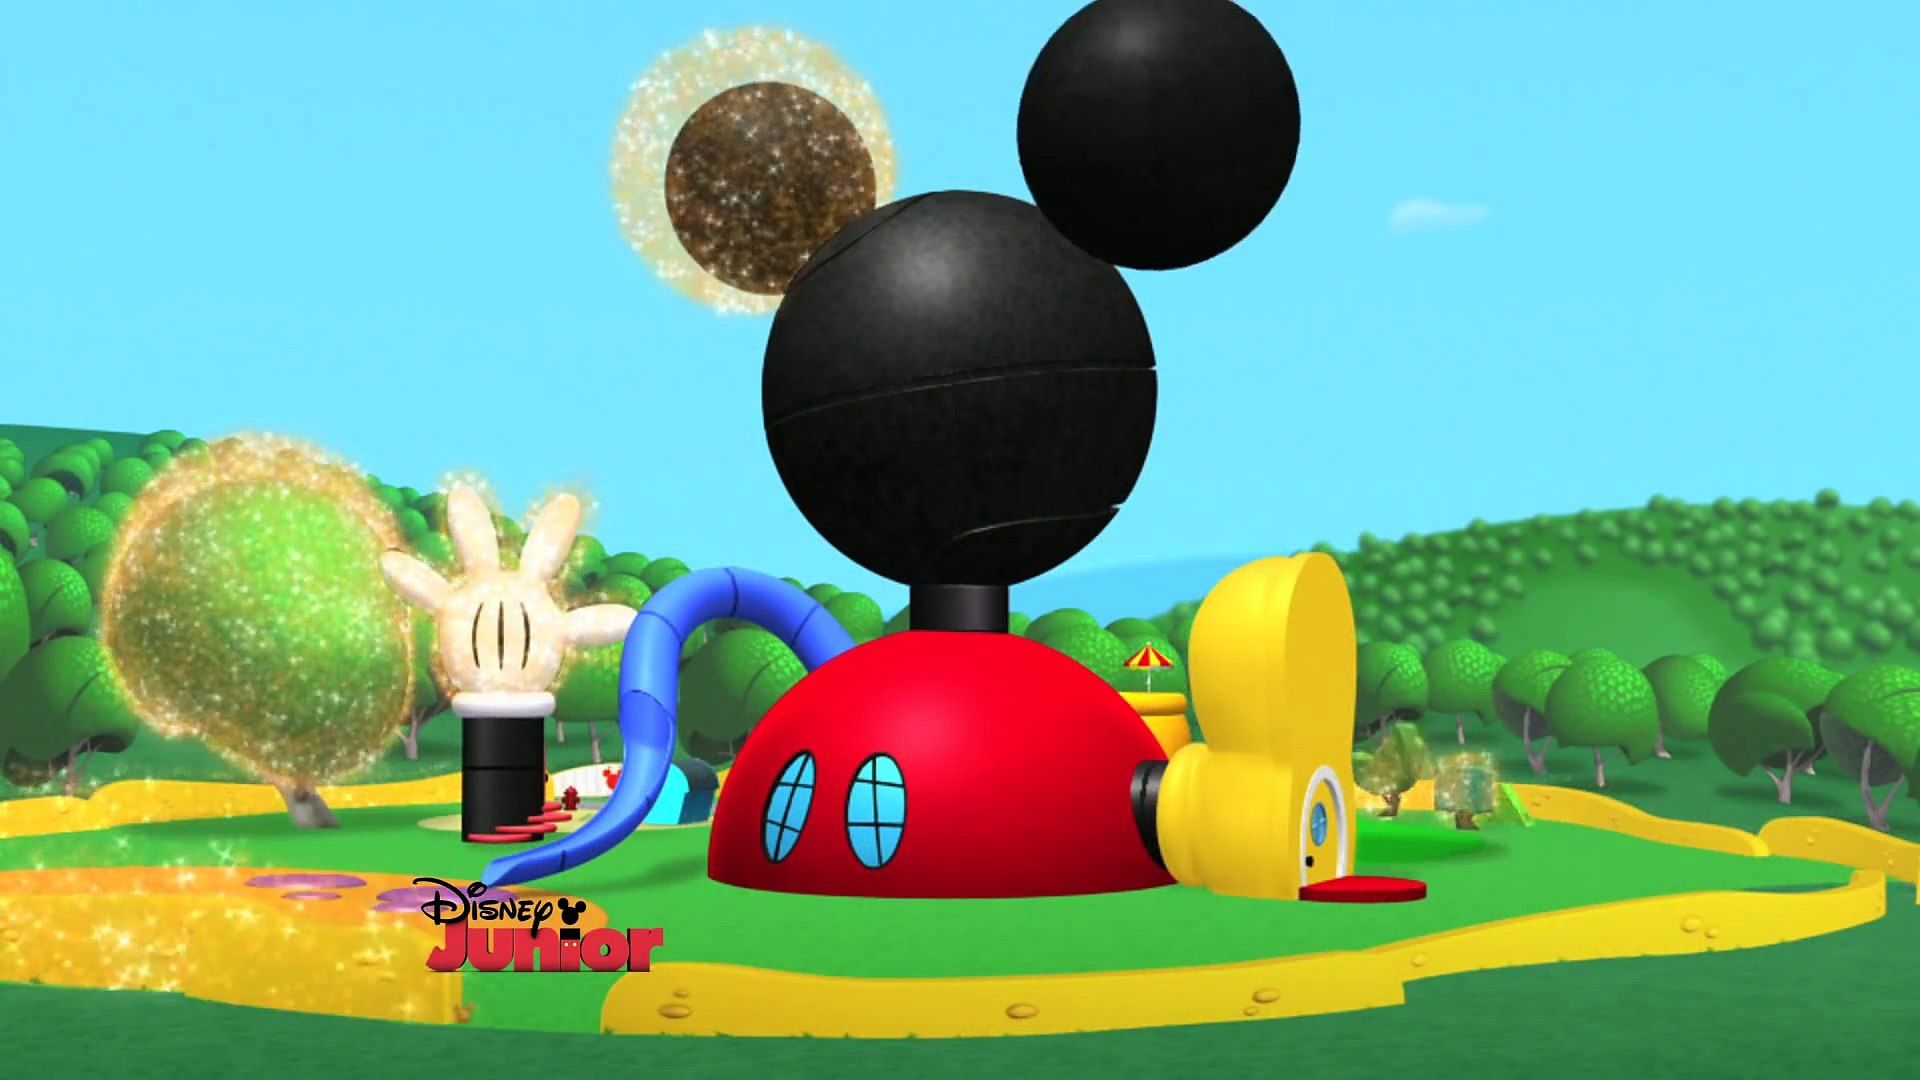 48 Mickey Mouse Clubhouse Images